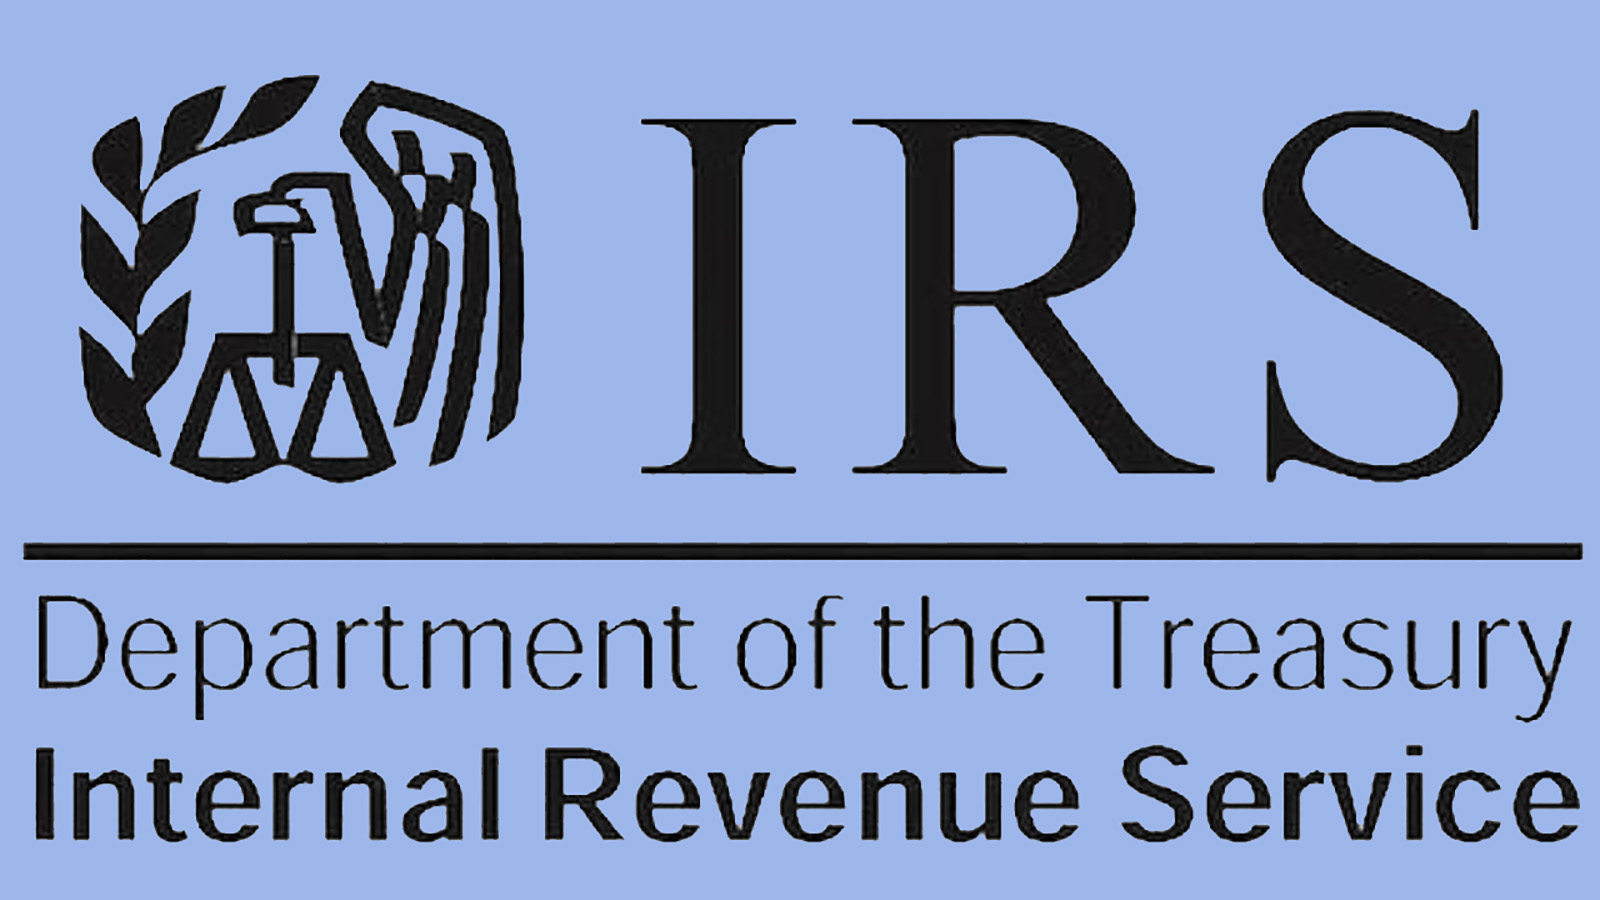 irs-get-my-payment-stimulus-web-app-logo-point-me-to-the-plane